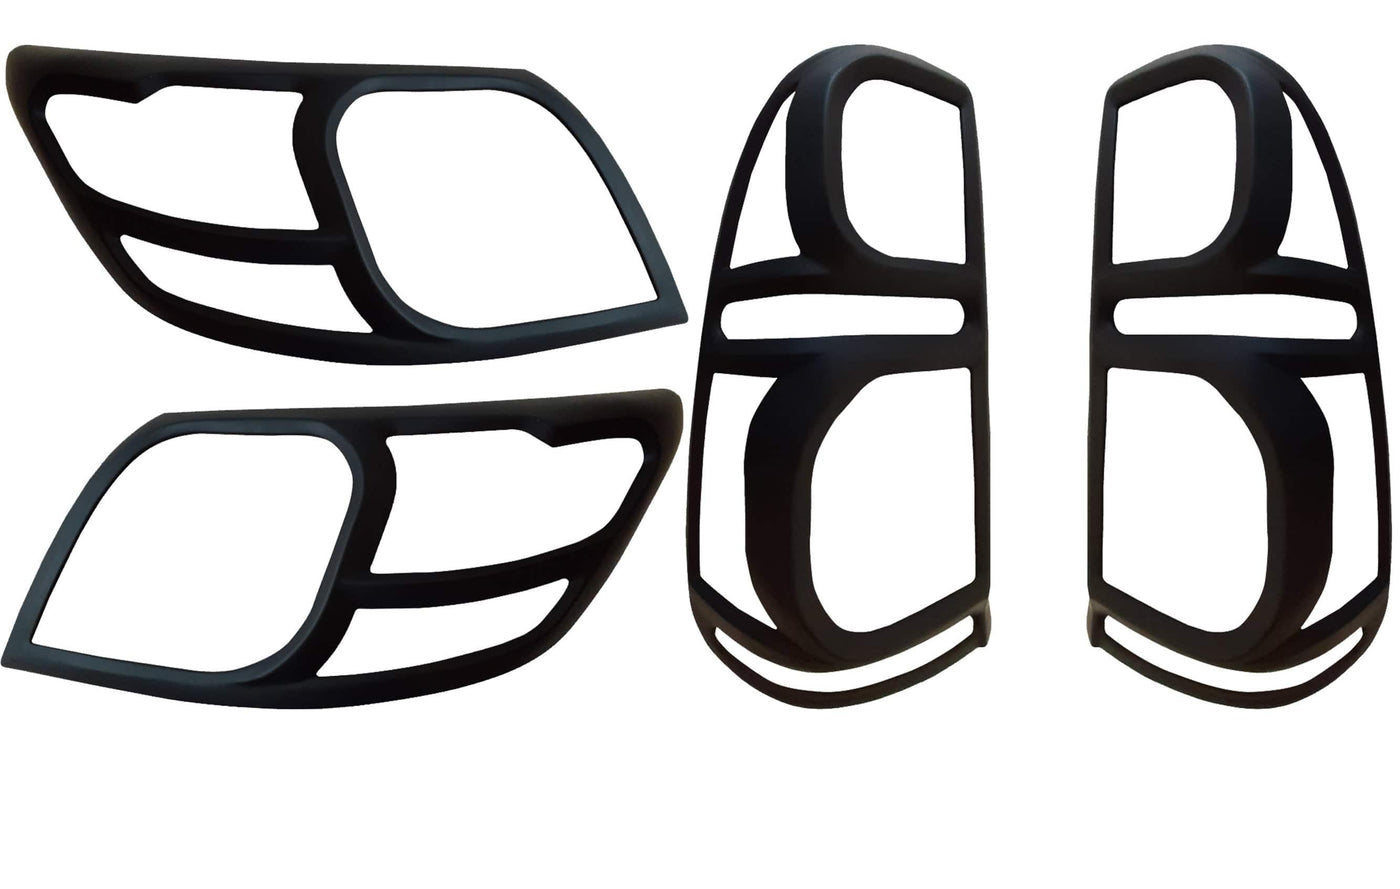 Combo Headlight Cover & Tail Light Cover Protectors Suits Toyota Hilux 2011-2015 (Online Only)